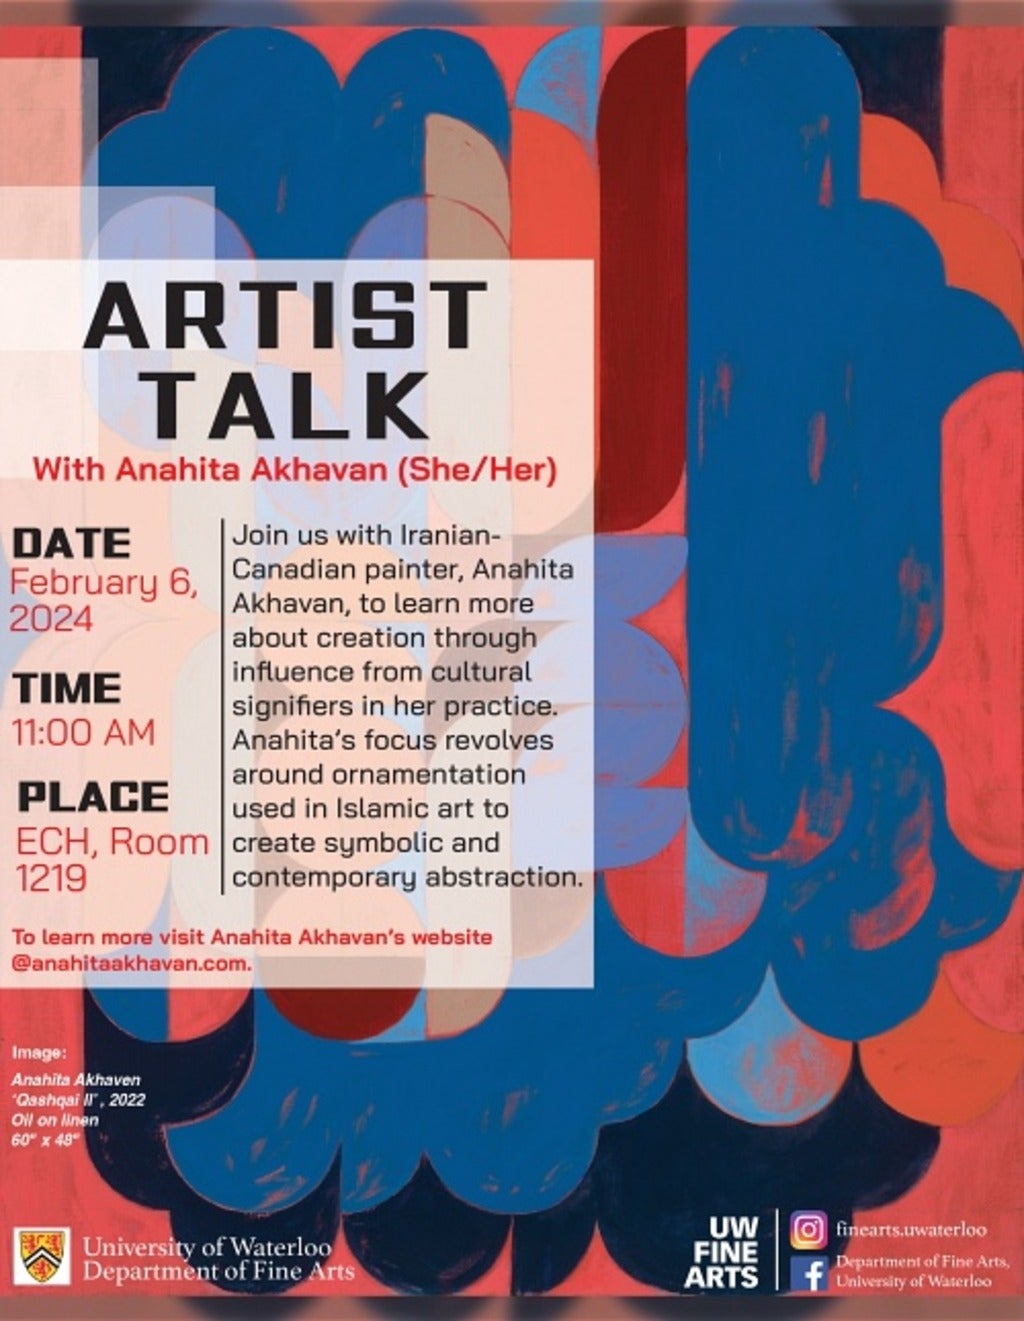 Poster for artist talk by Anahita Akhavan on February 6 2024 at 11 a.m. in ECH 1219.  Background of poster shows an abstract painting of overlapping, elongated ovals is shades of blue and red. 